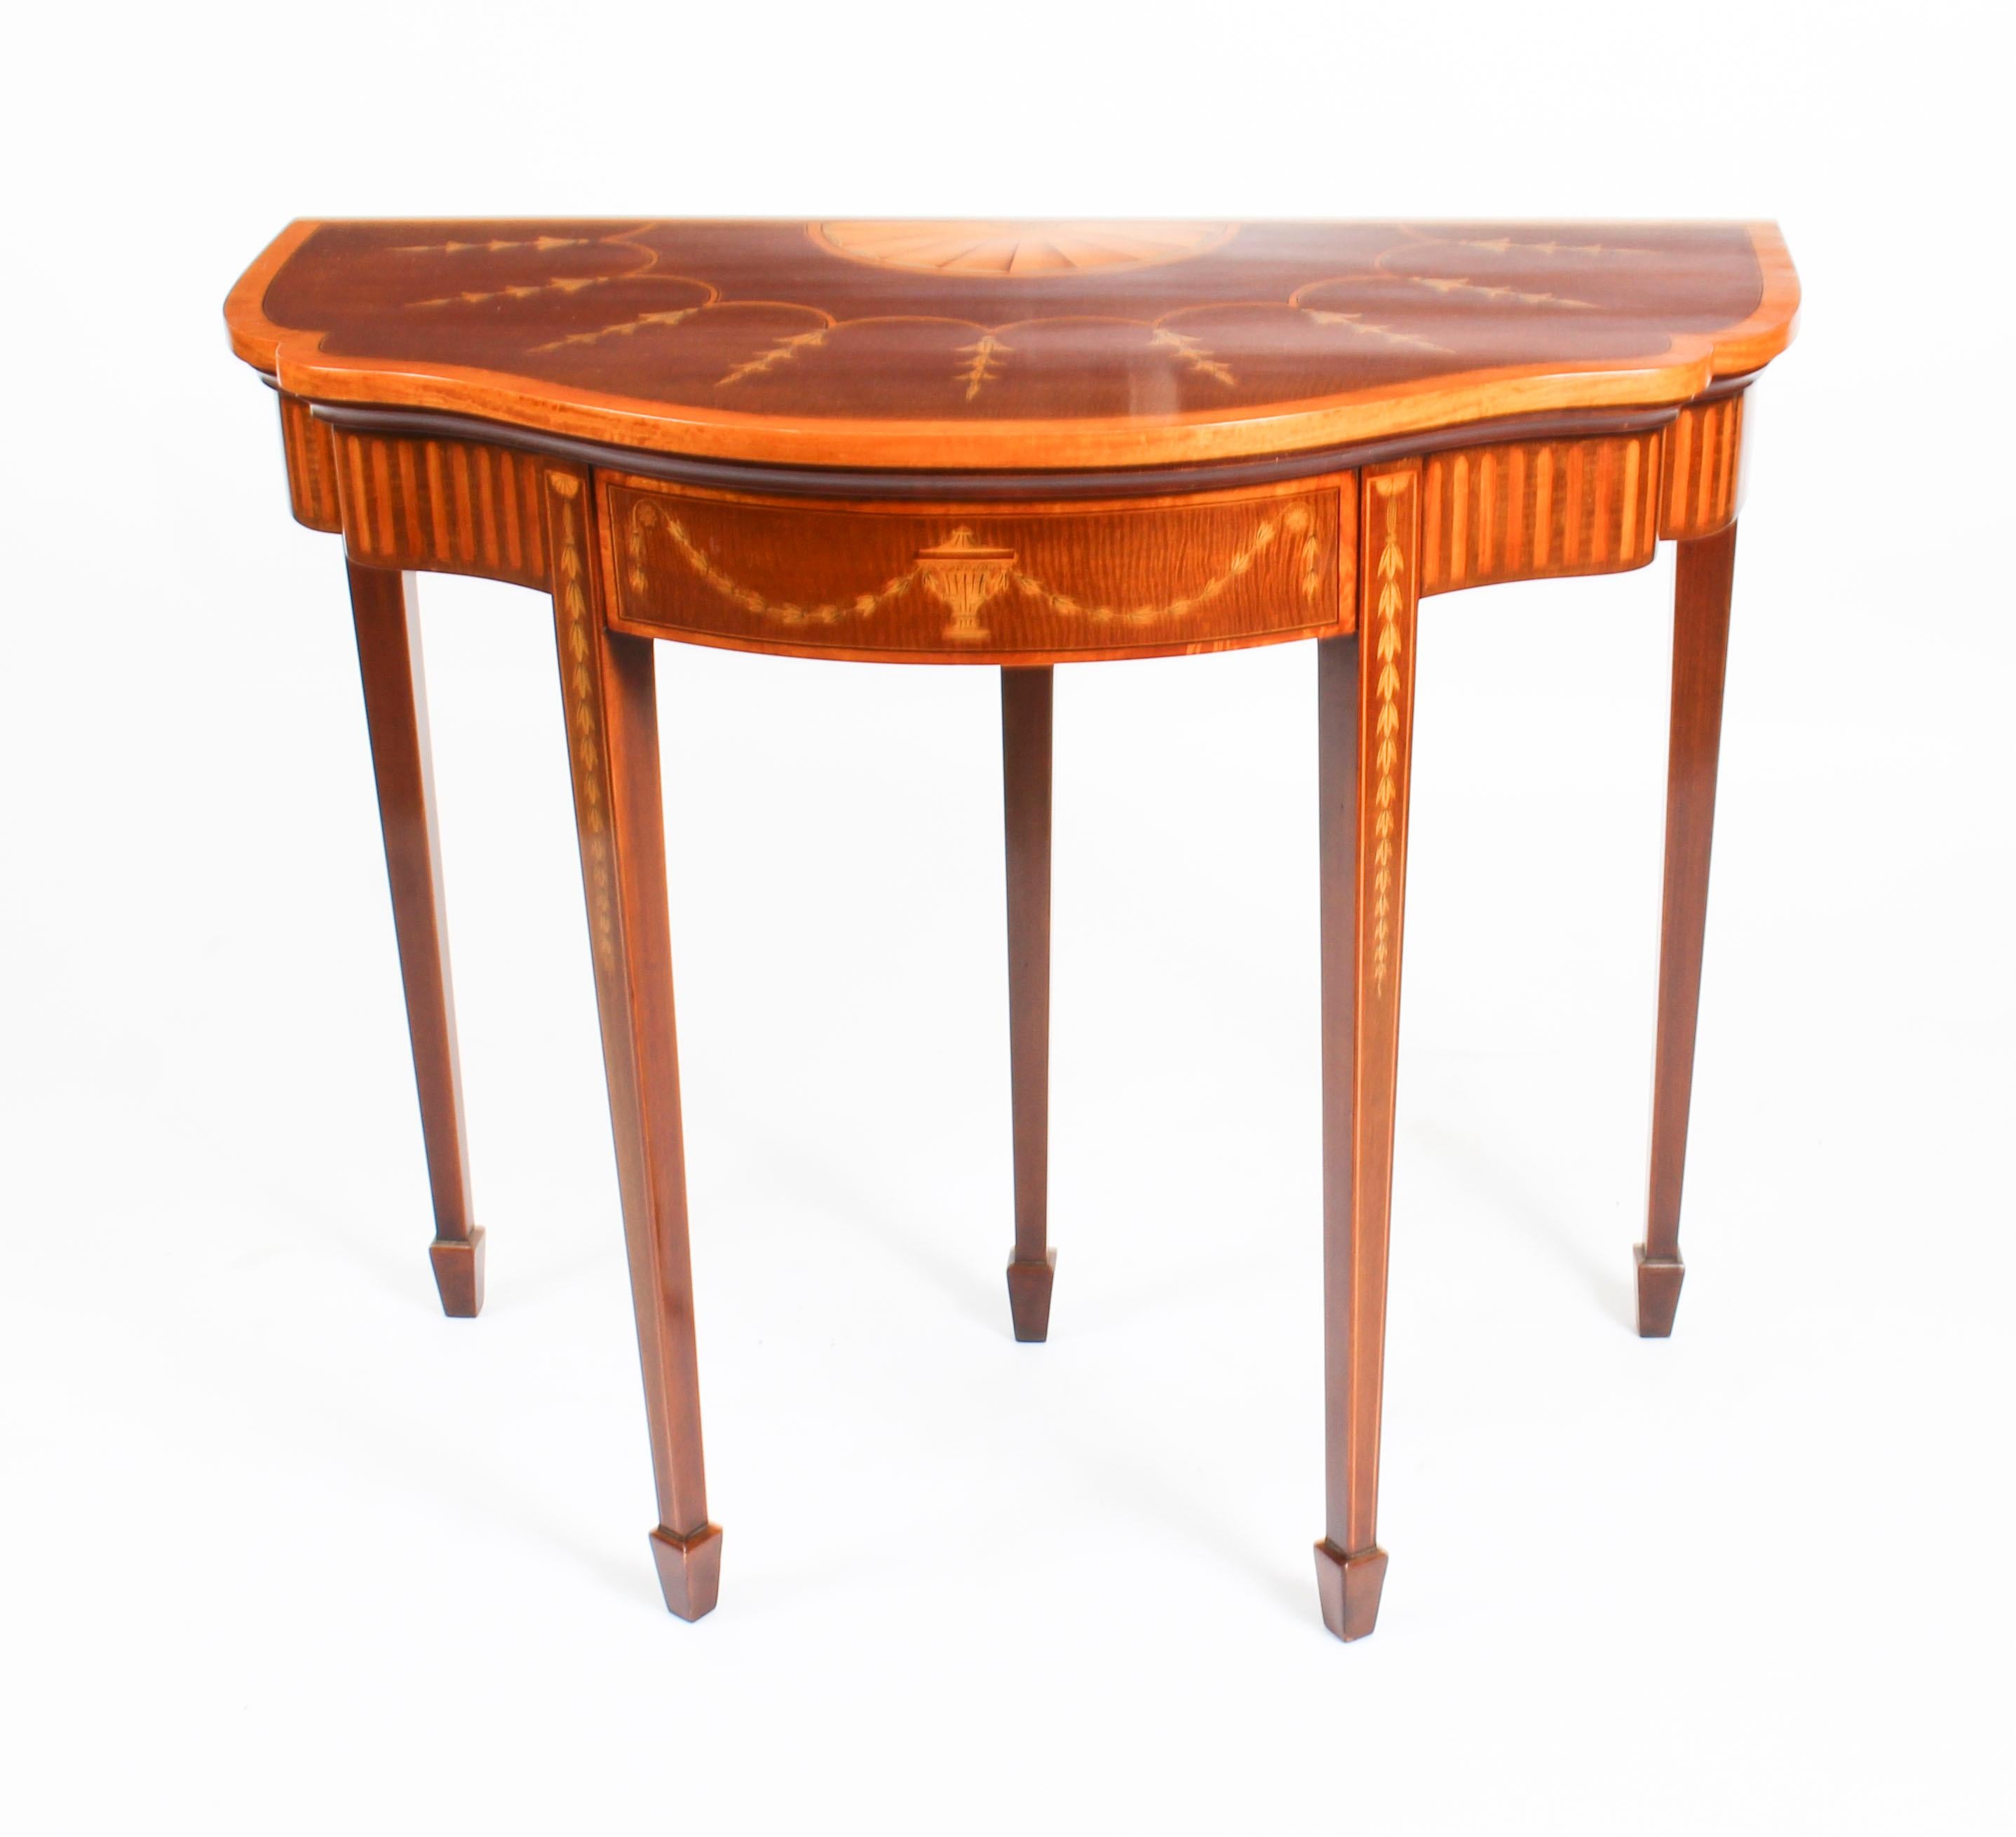 This is a beautiful antique serpentine card table, circa 1880 in date, and in superb George III style.

The card table is of mahogany with beautiful Neoclassical satinwood inlaid marquetry decoration of shells, garland and urns, the interior is